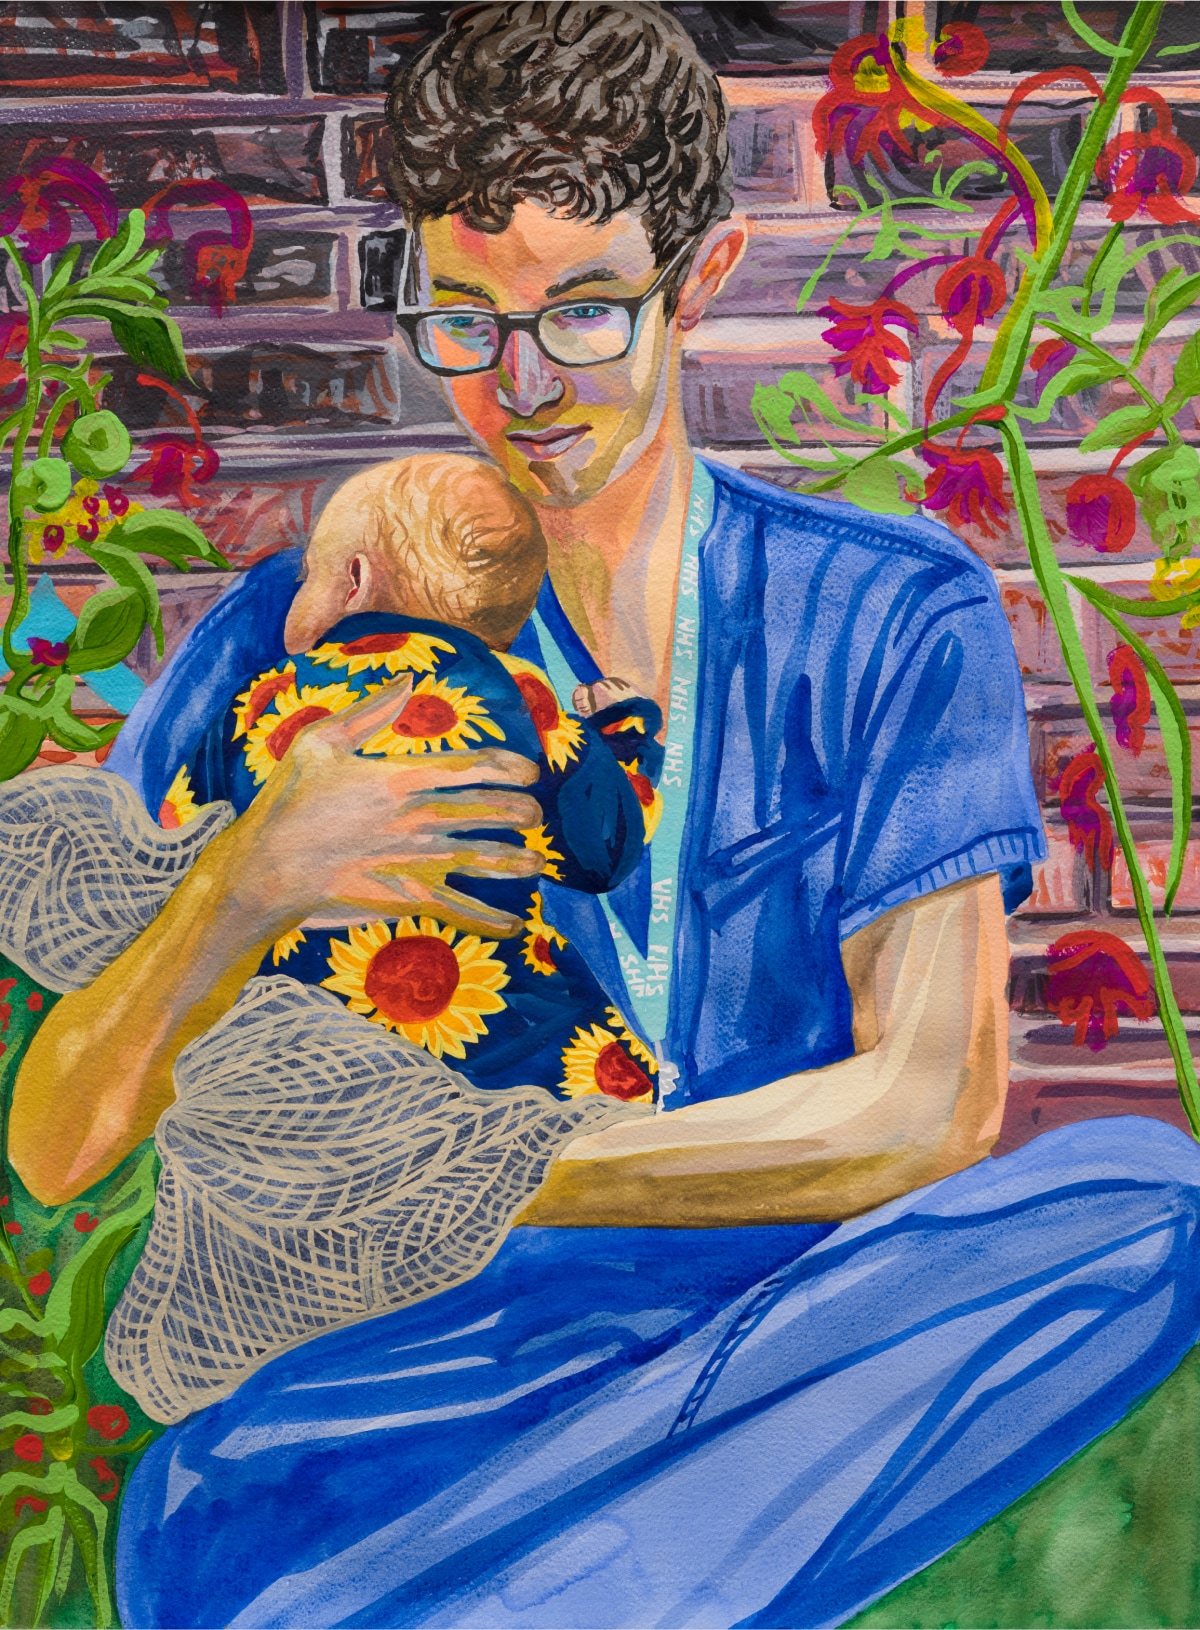 Nisenbaum’s “Ryan” featuring a young man in blue scrubs holding a baby wearing a sunfloor onesie